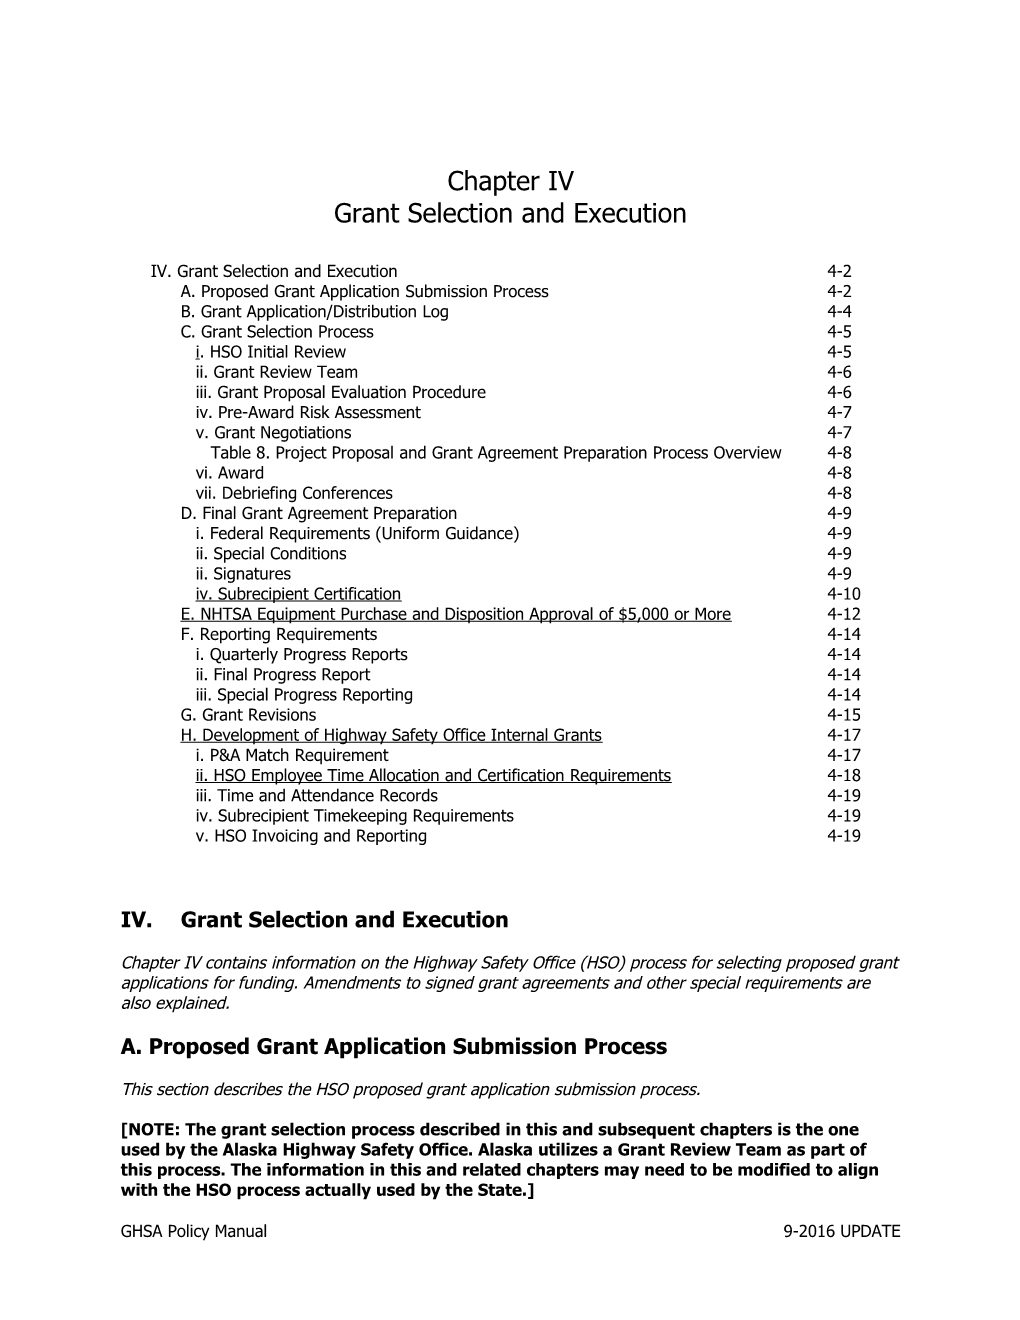 IV.Grant Selection and Execution